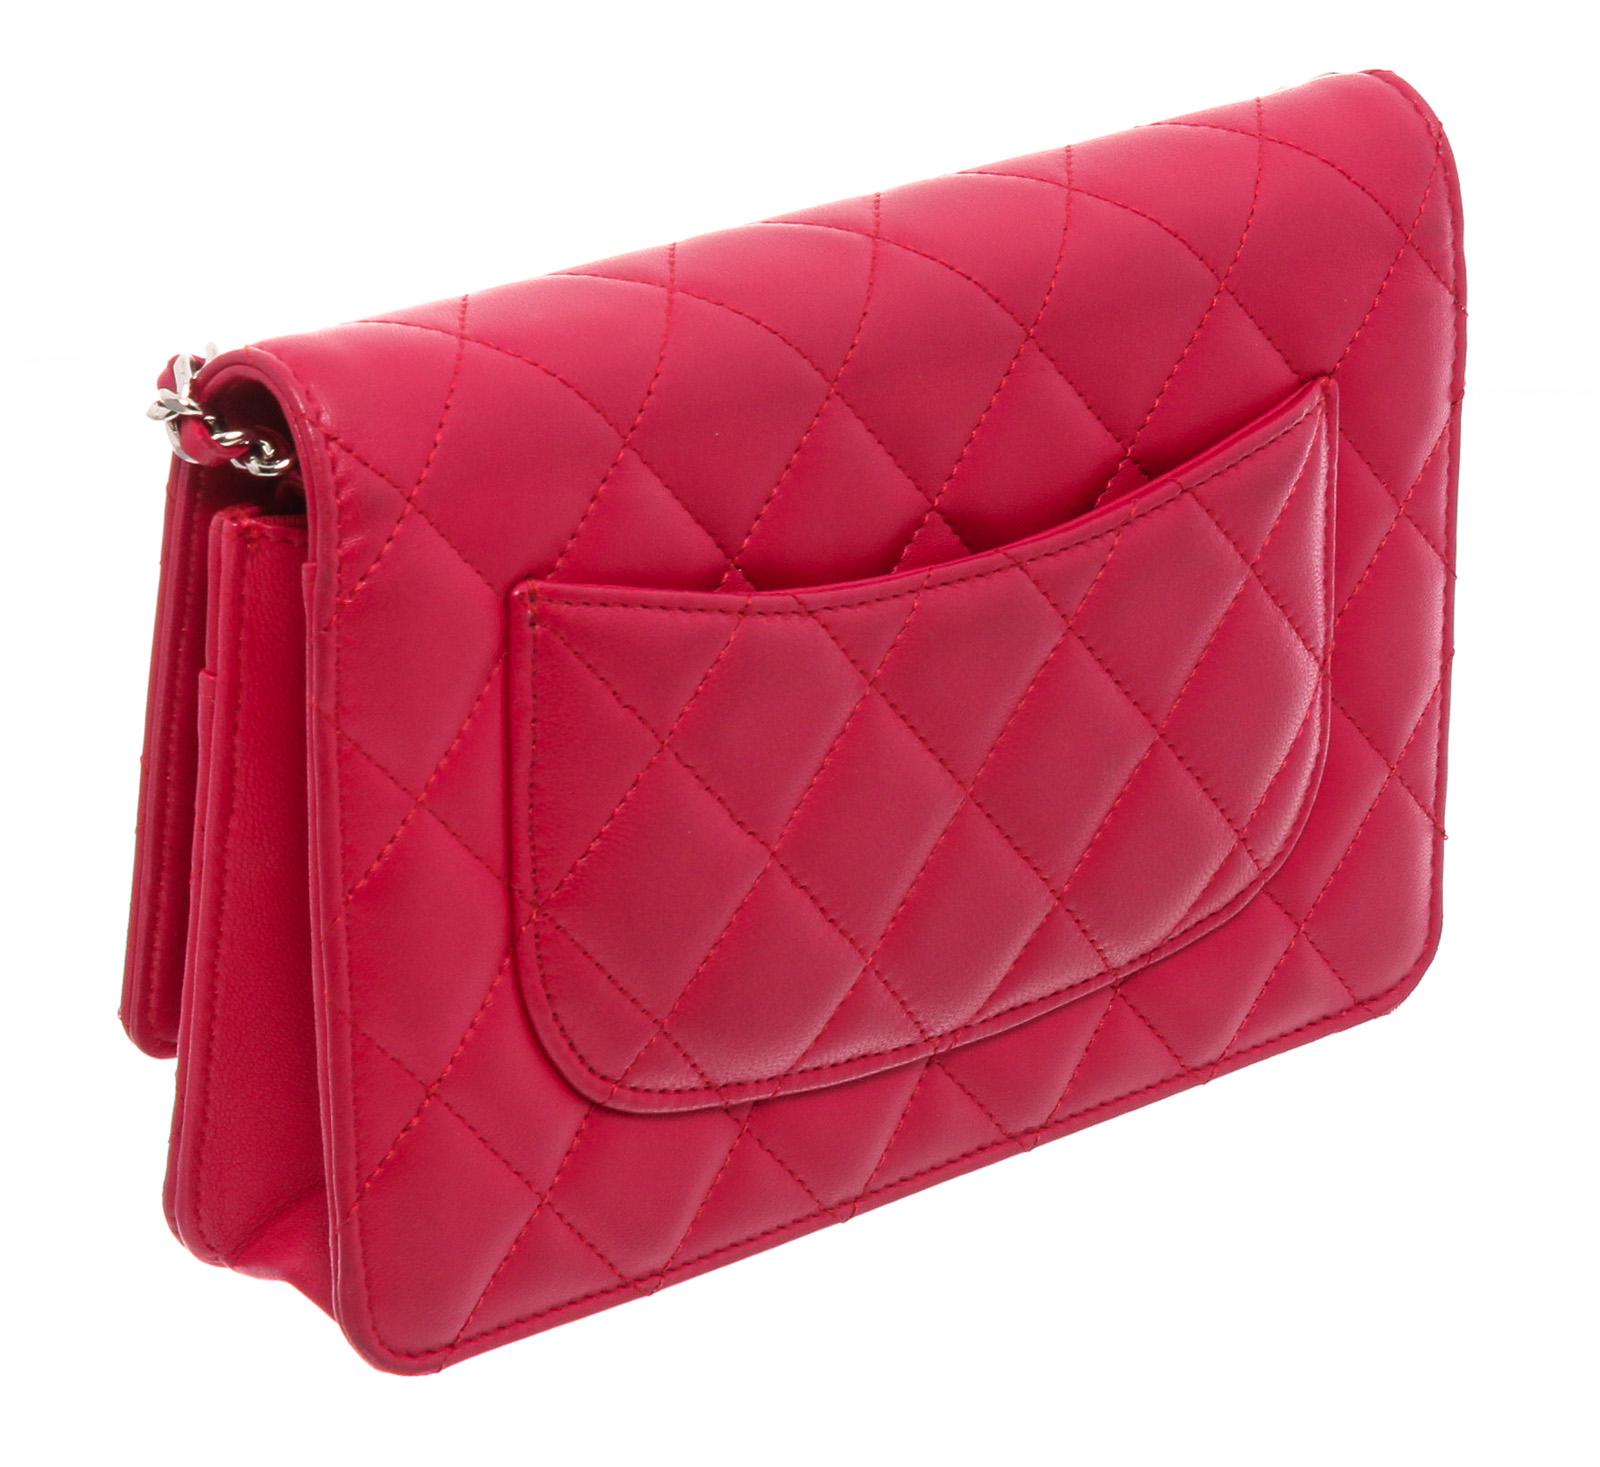 Pink Quilted Lambskin Leather Chanel Wallet On Chain with silver-tone hardware, single leather and chain-link shoulder strap, CC logo adornment at front, single zip pocket flap underside, single slit pocket under front flap, dual compartments; one